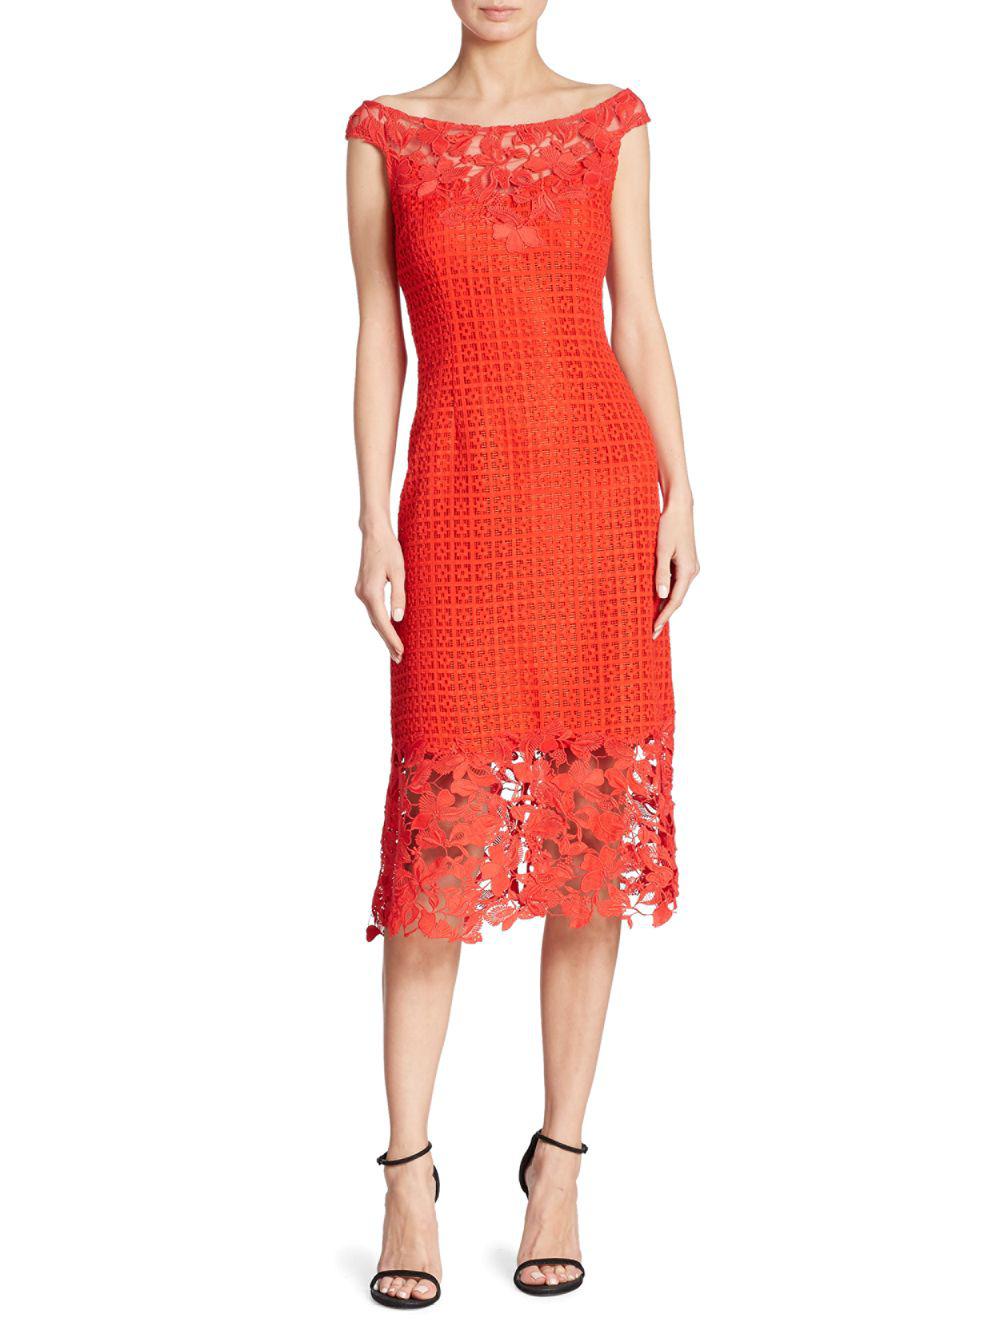 Kay Unger Boat Neck Floral Lace Sheath Dress in Red - Lyst